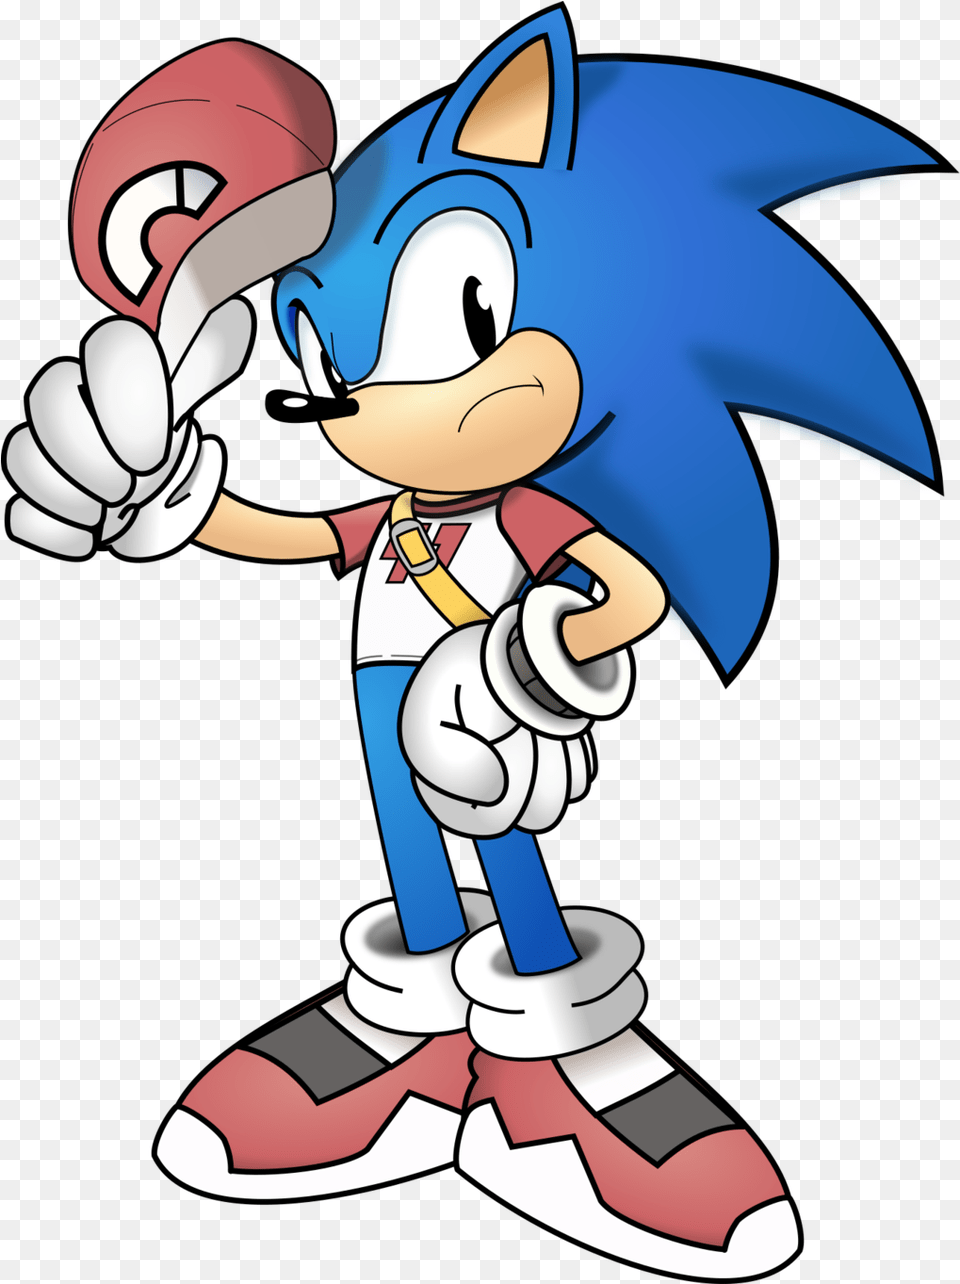 Sonic The Hedgehog Clipart Red Sonic The Hedgehog Pokemon Sonic The Hedgehog Older, Book, Comics, Publication, Cartoon Png Image